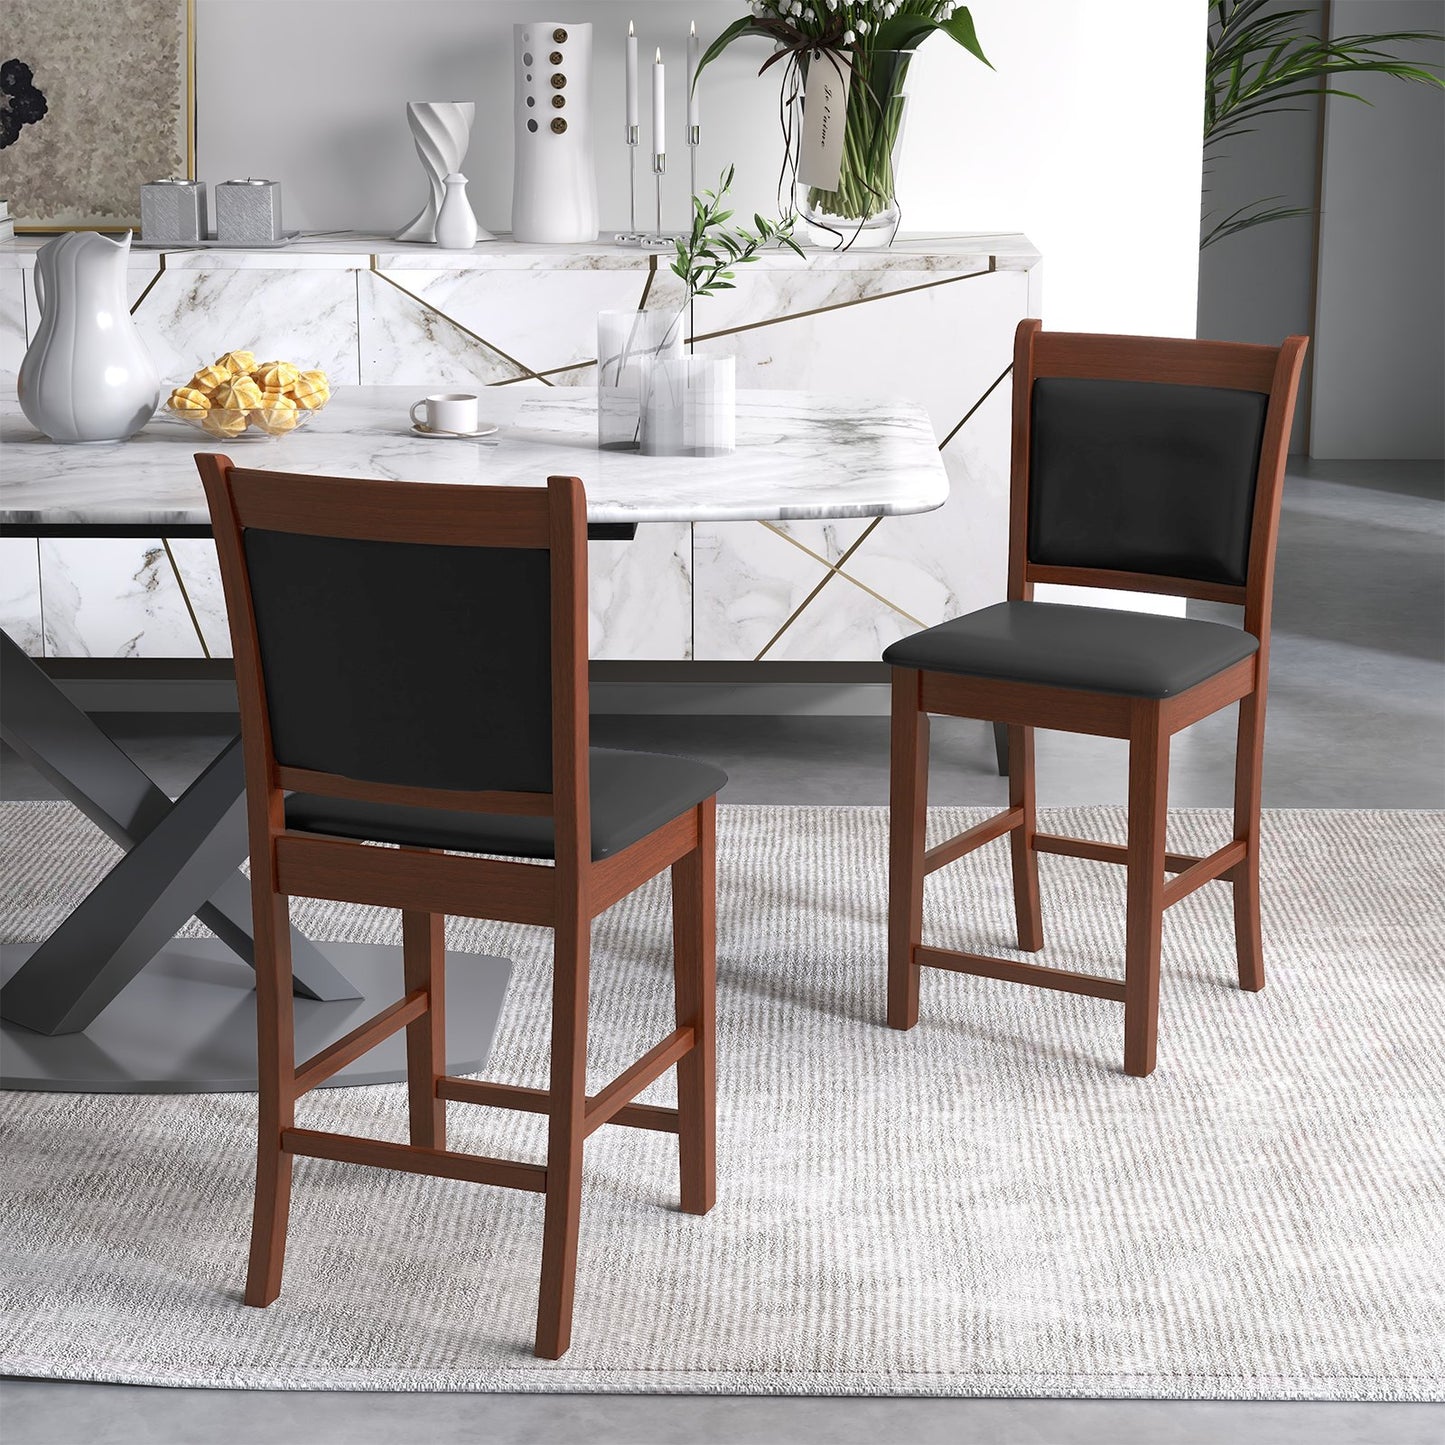 Upholstered Counter Stool Set of 2 with Solid Rubber Wood Frame, Brown